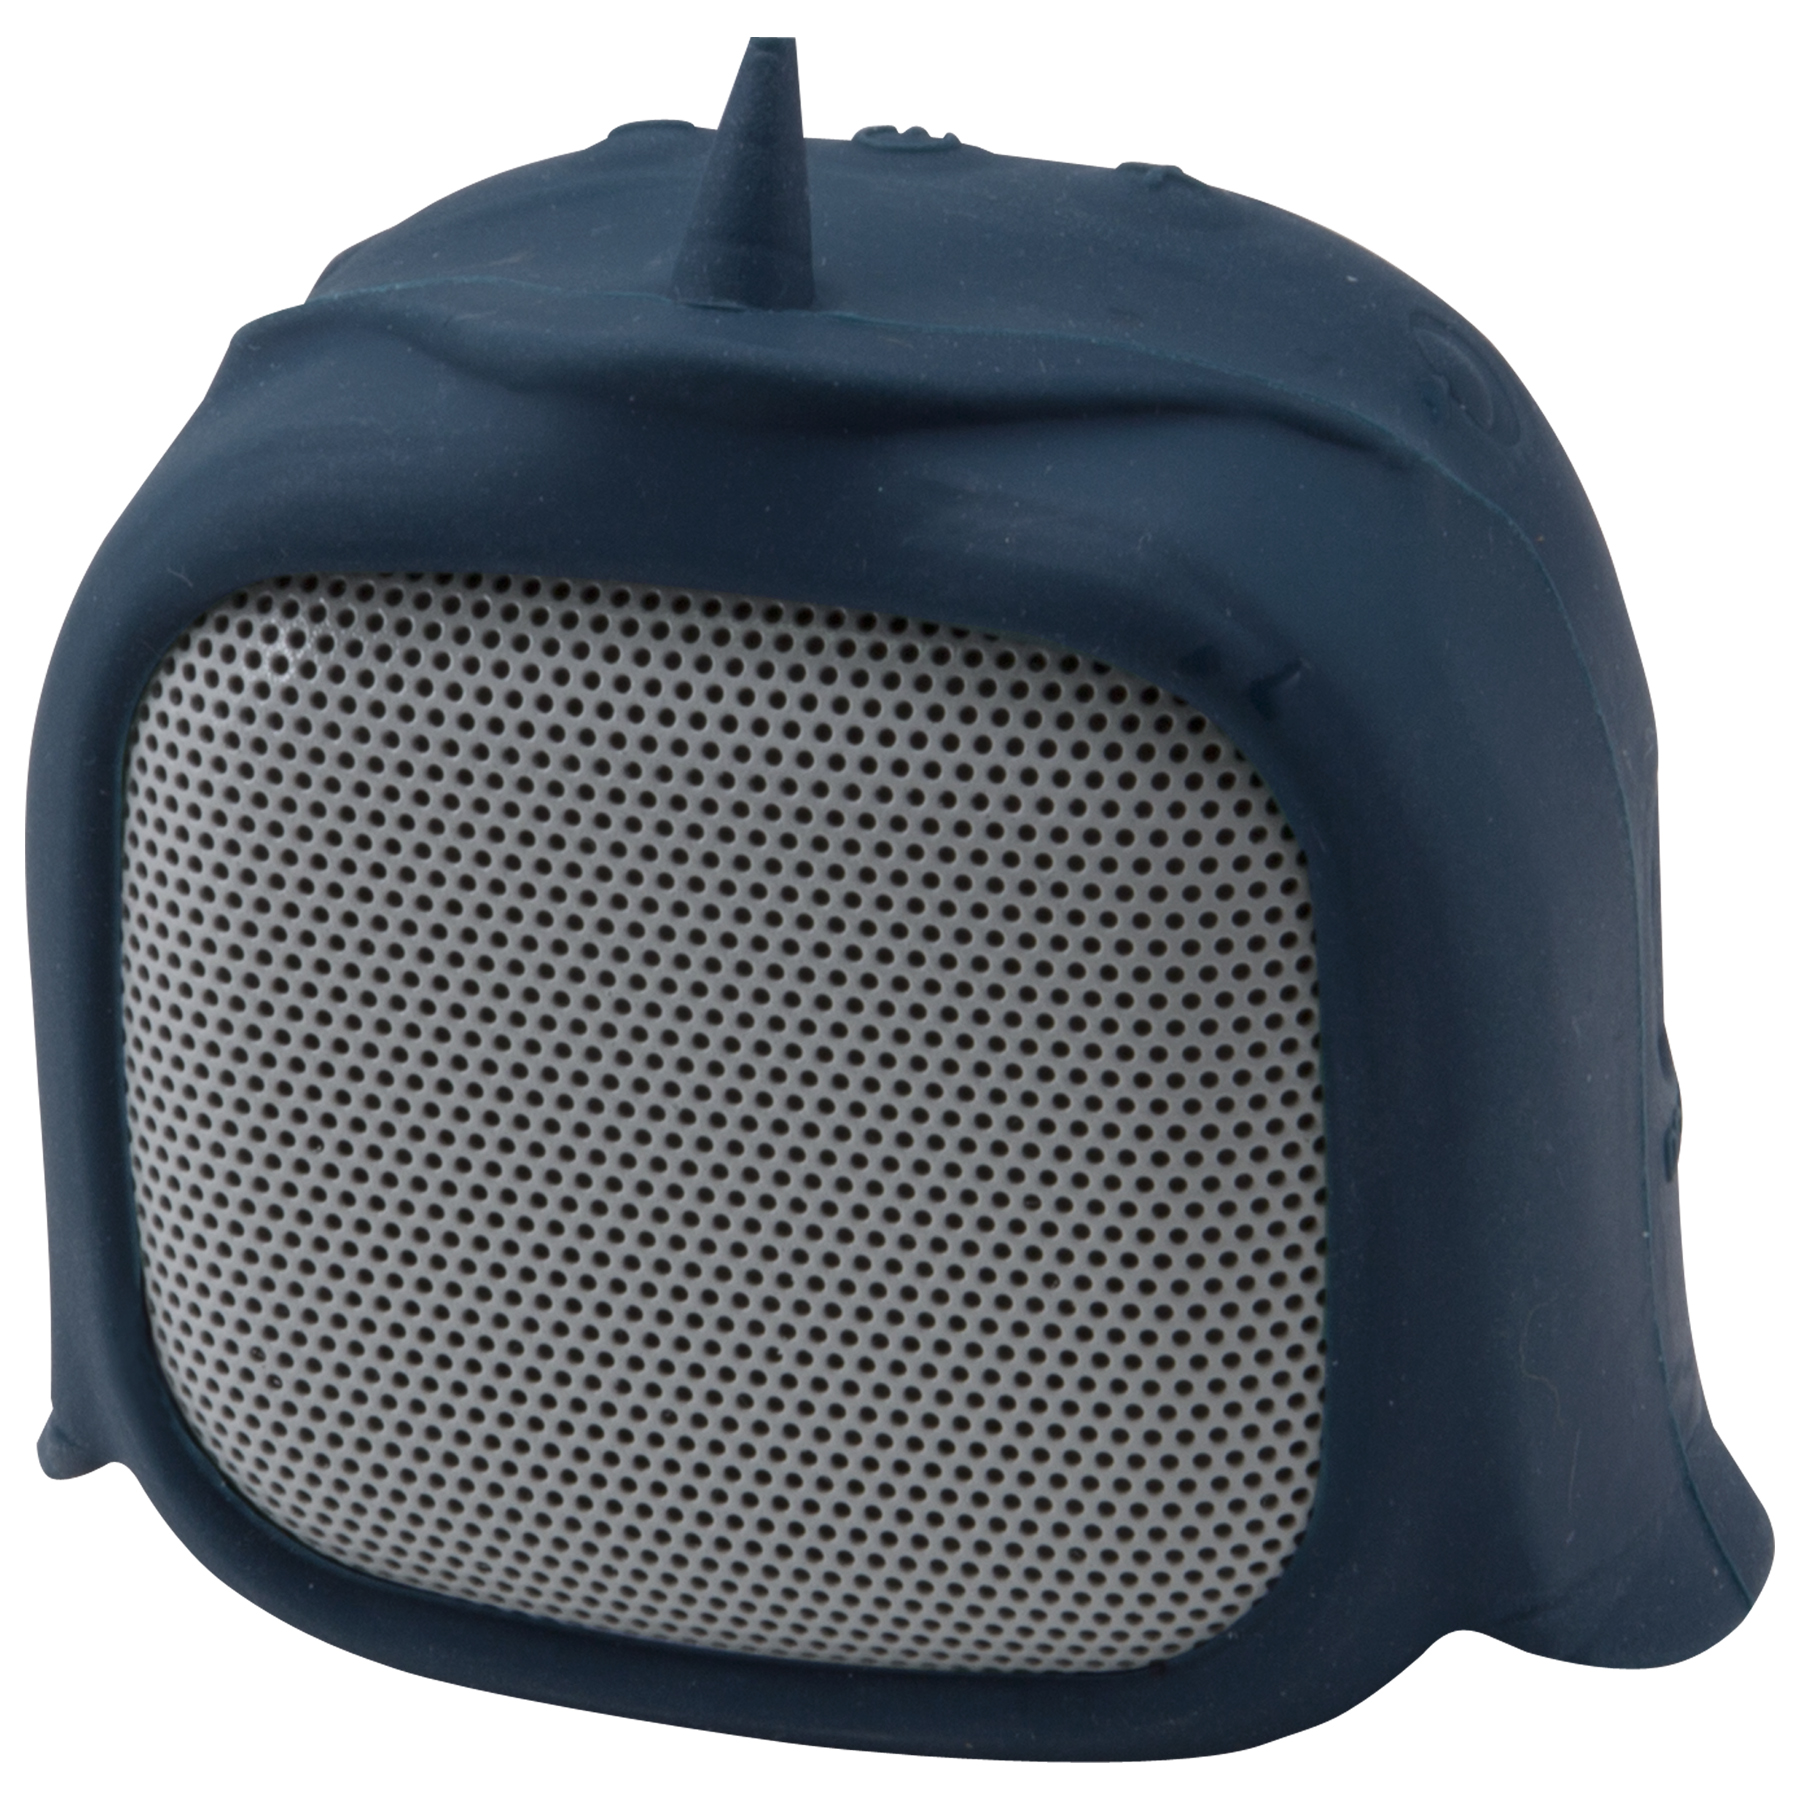 iLive Wild Tailz Wireless Narwhal Speaker, ISB19NAR - image 1 of 4